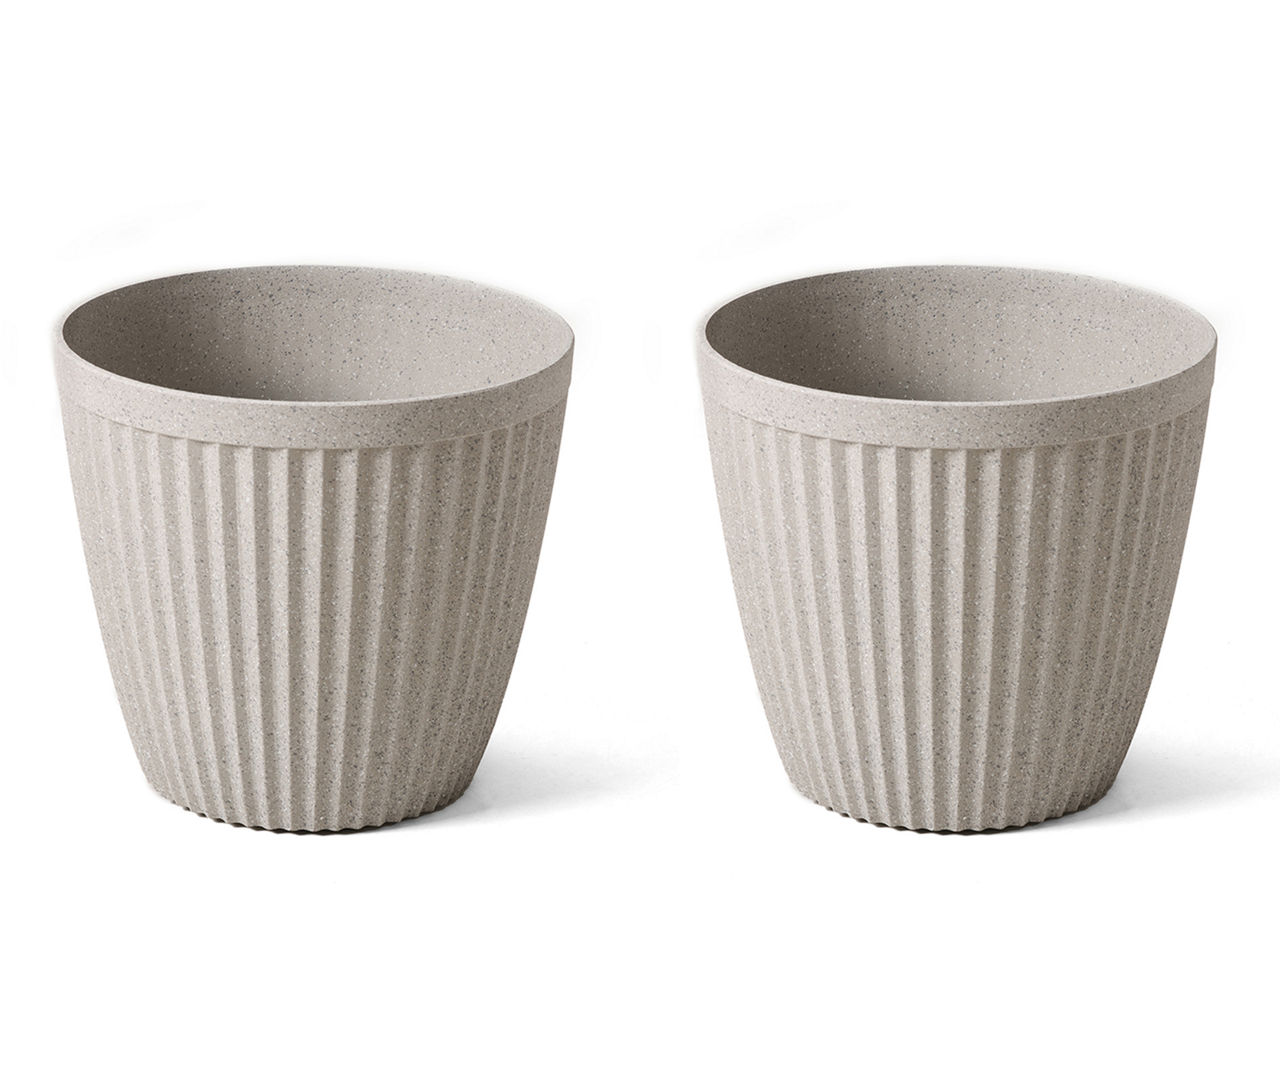 15.5" Beige Fluted Plastic Planters, 2-Pack